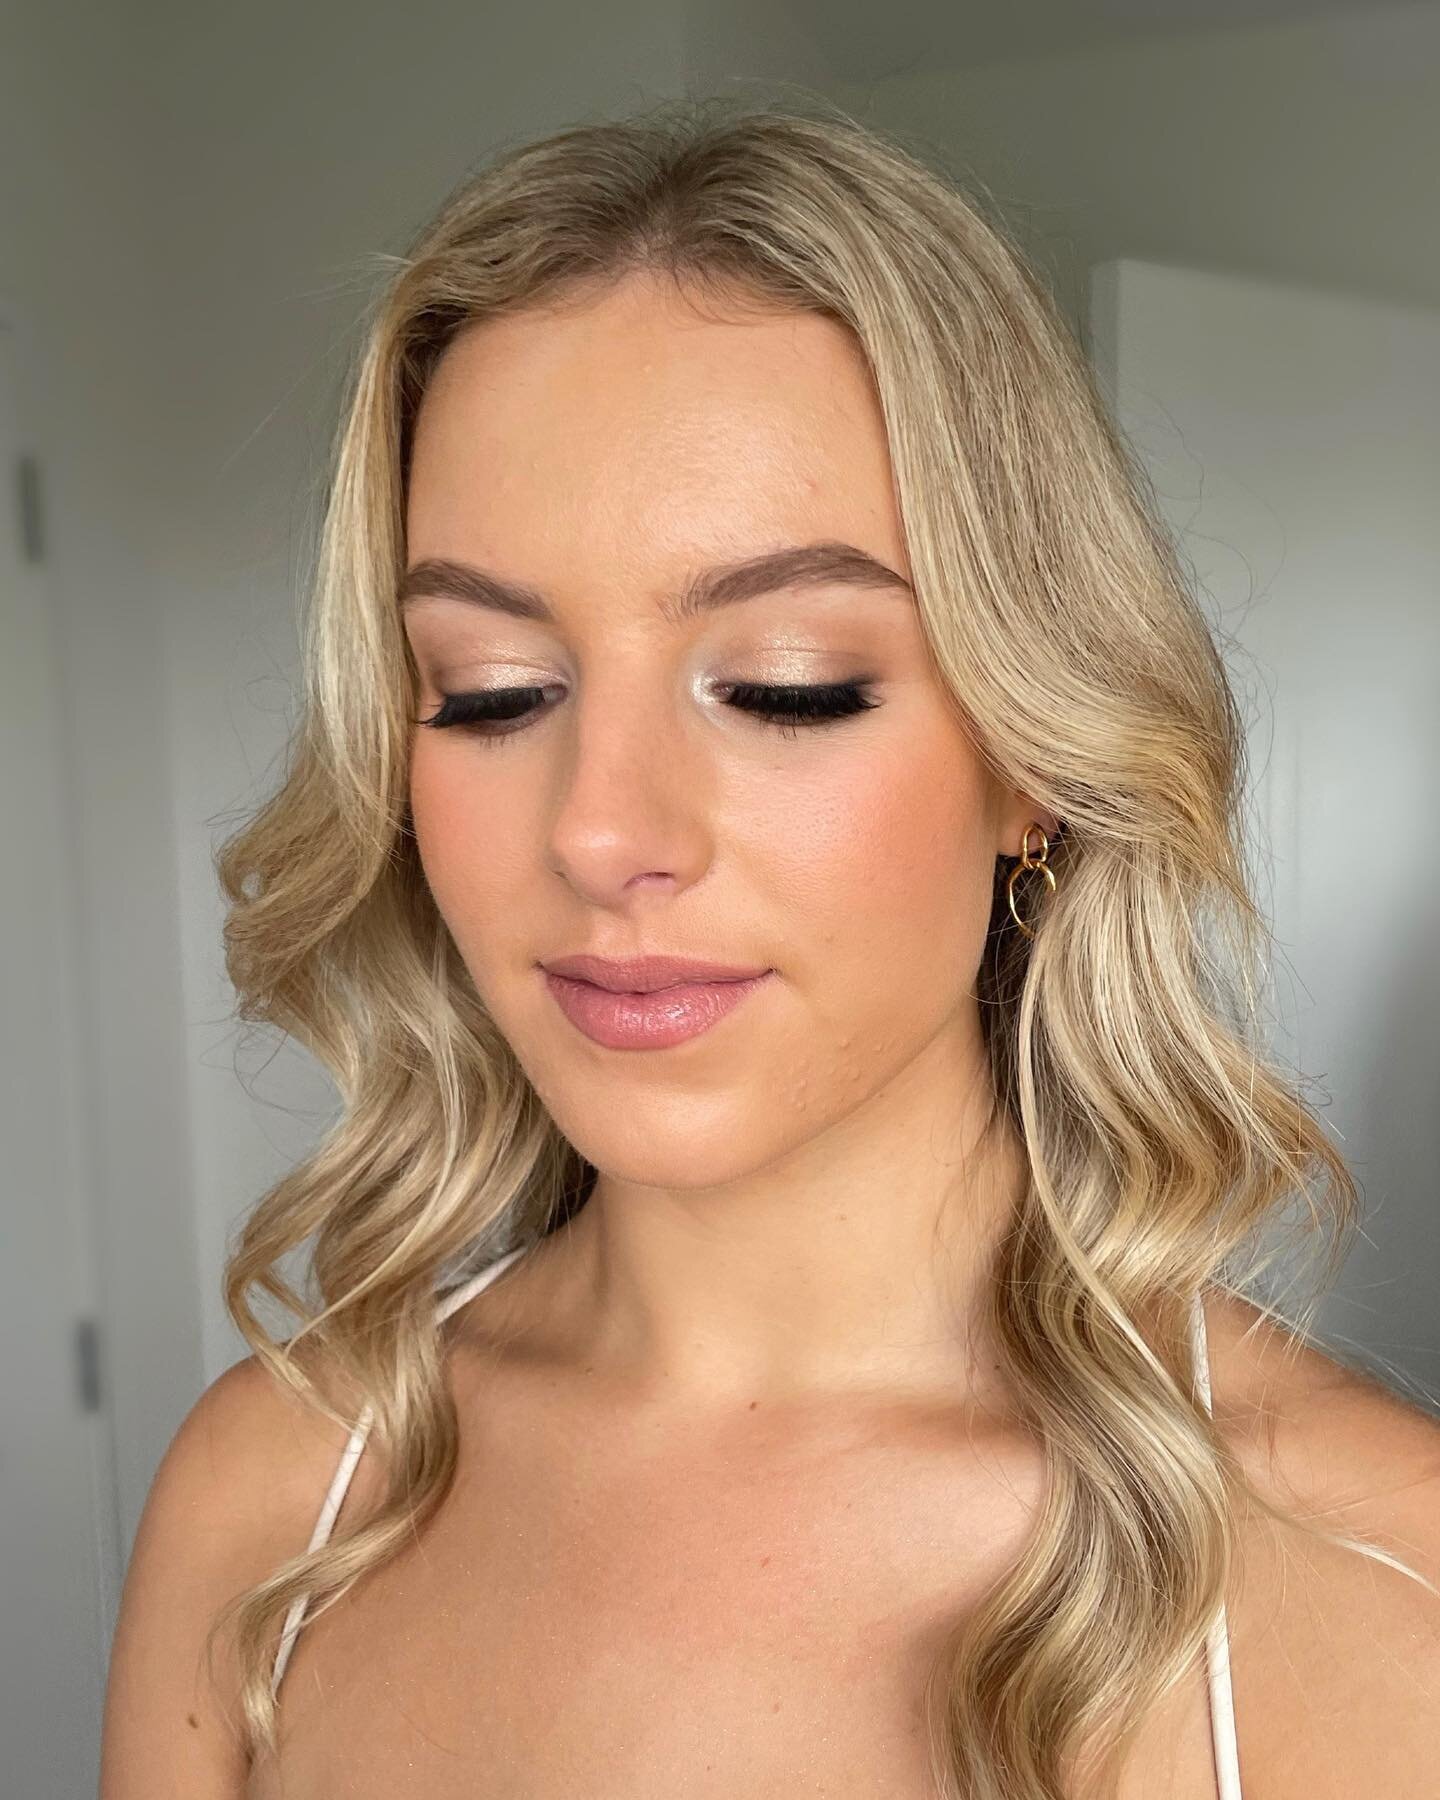 what a weekend! 3 weddings, 18 faces - here&rsquo;s one of them! love this soft bridesmaids look ✨ can&rsquo;t wait to share more from the weekend! 

@nataliedentmakeupandhair on hair 😍 

#aucklandmakeupartist #aucklandmua #nzmakeupartist #nzmua #nz